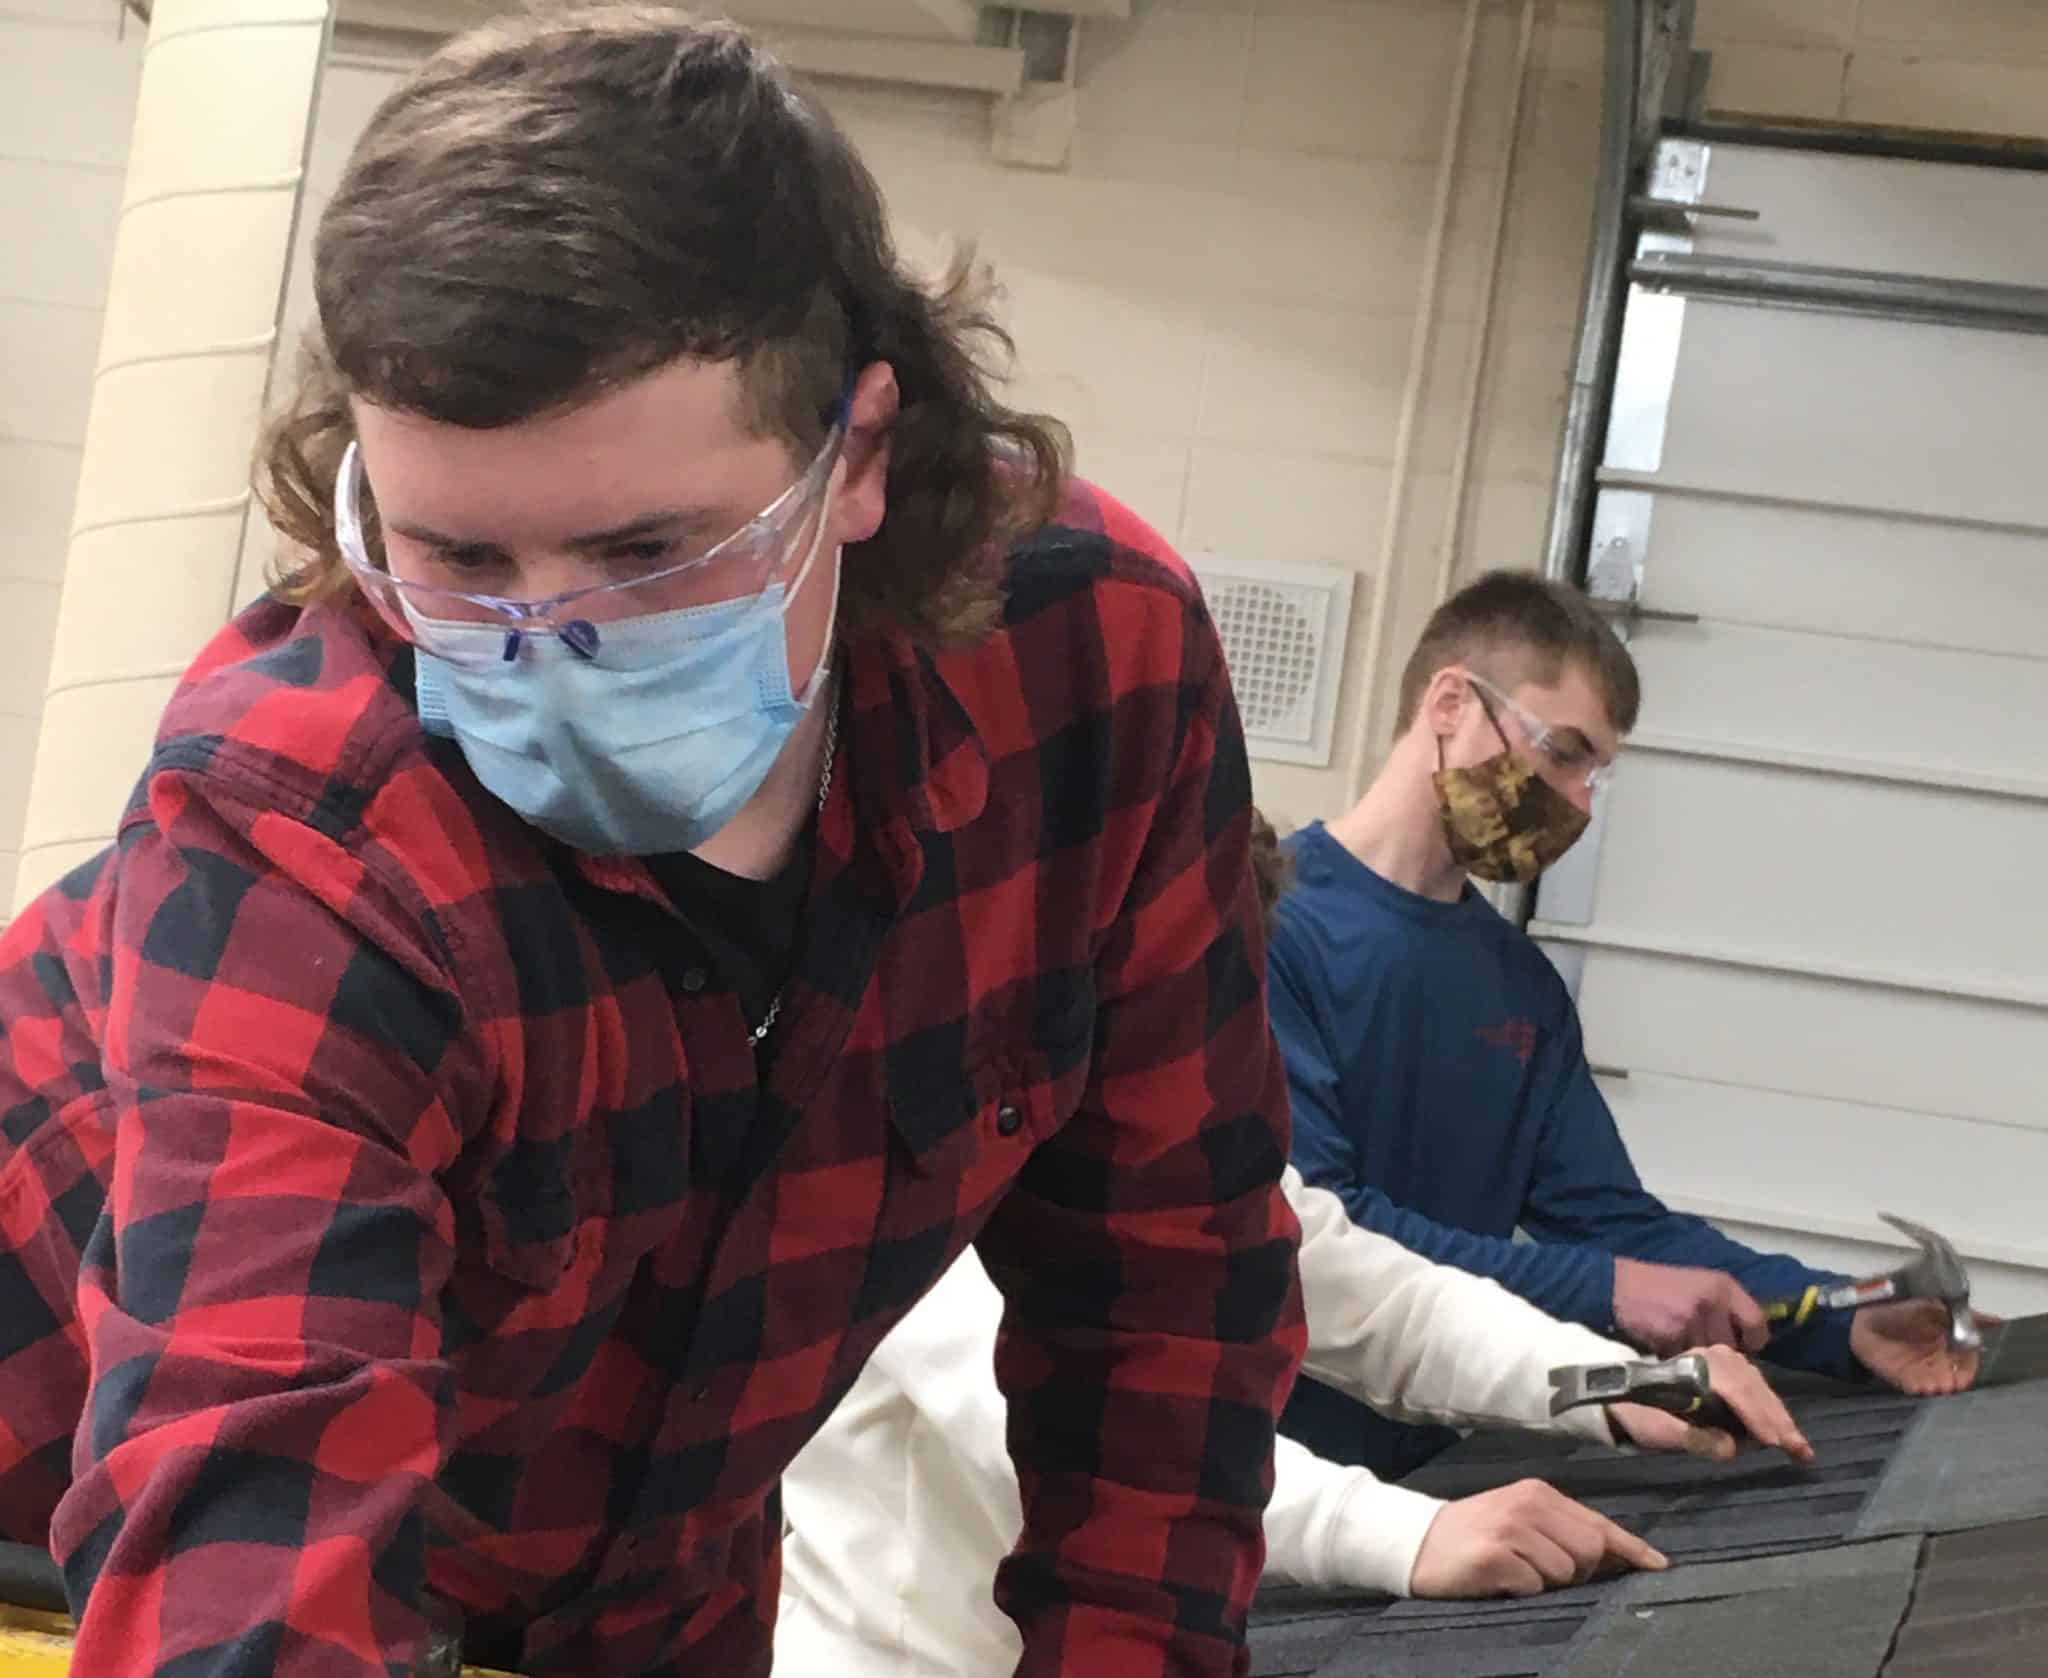 THS Building Trades students developing community pride through hands-on experience